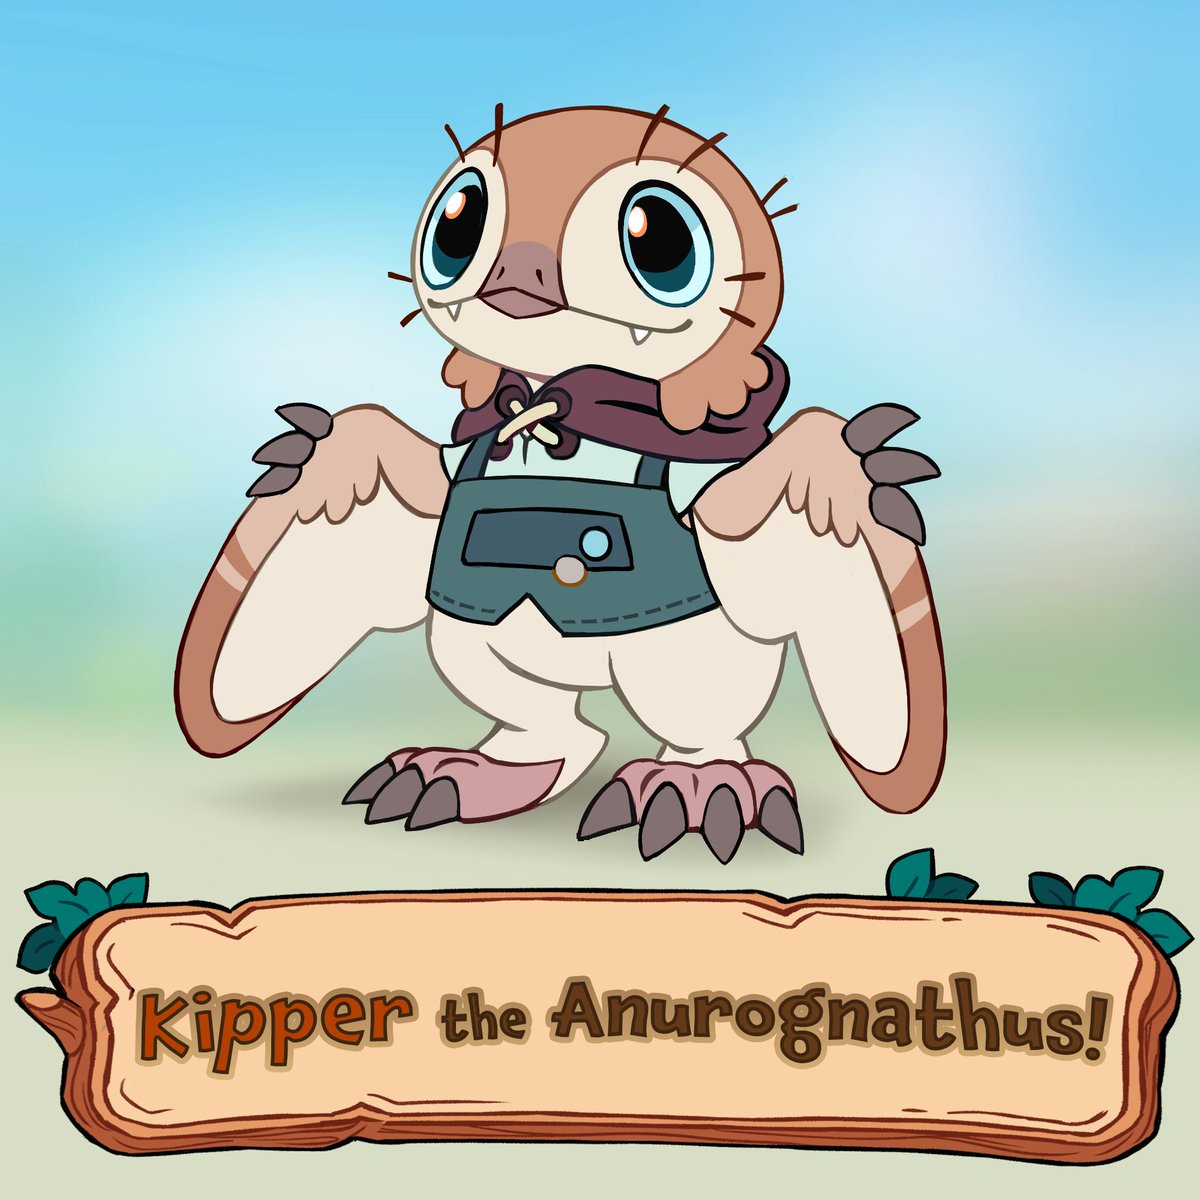 Introducing... Kipper the Anurognathus! 🤎🍞 - Officially our smallest and softest Paleofolk - Likes bread and collecting bugs - No thoughts only friendship